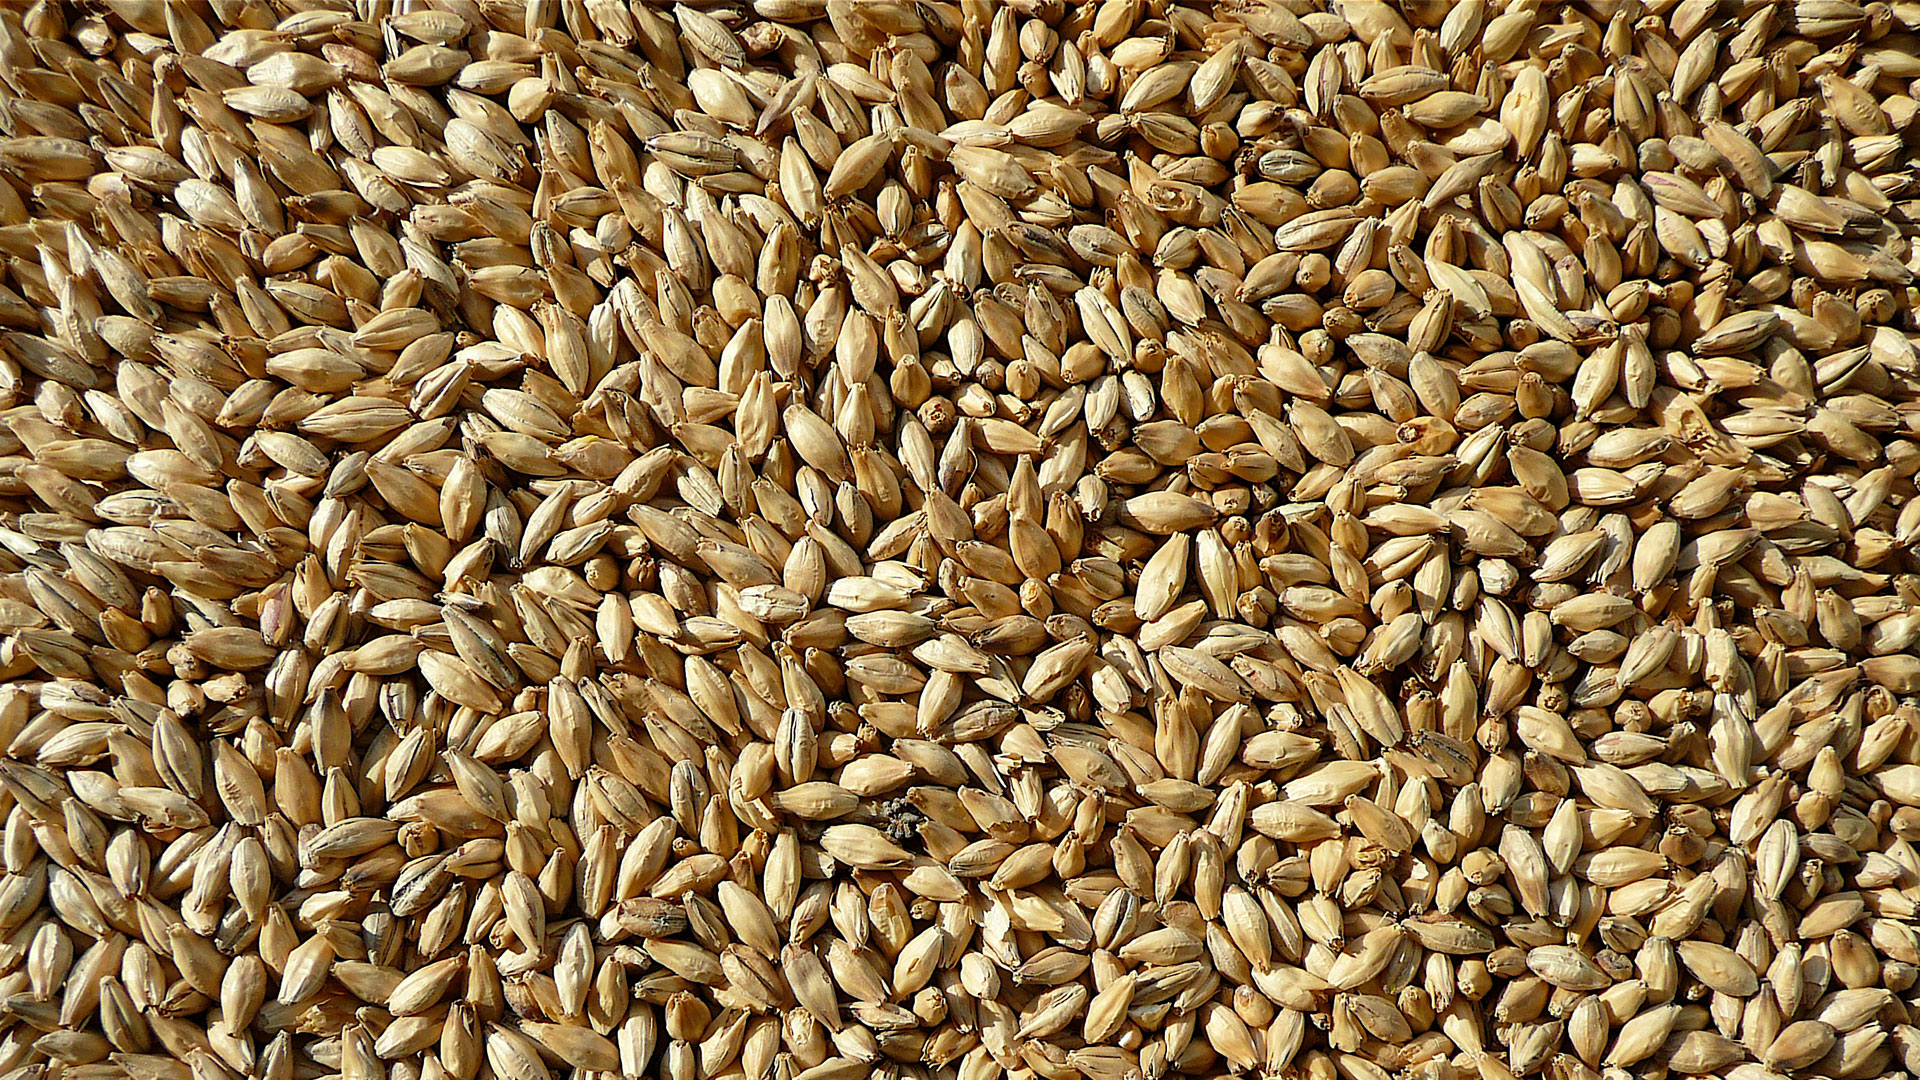 Malt – from barley and wheat